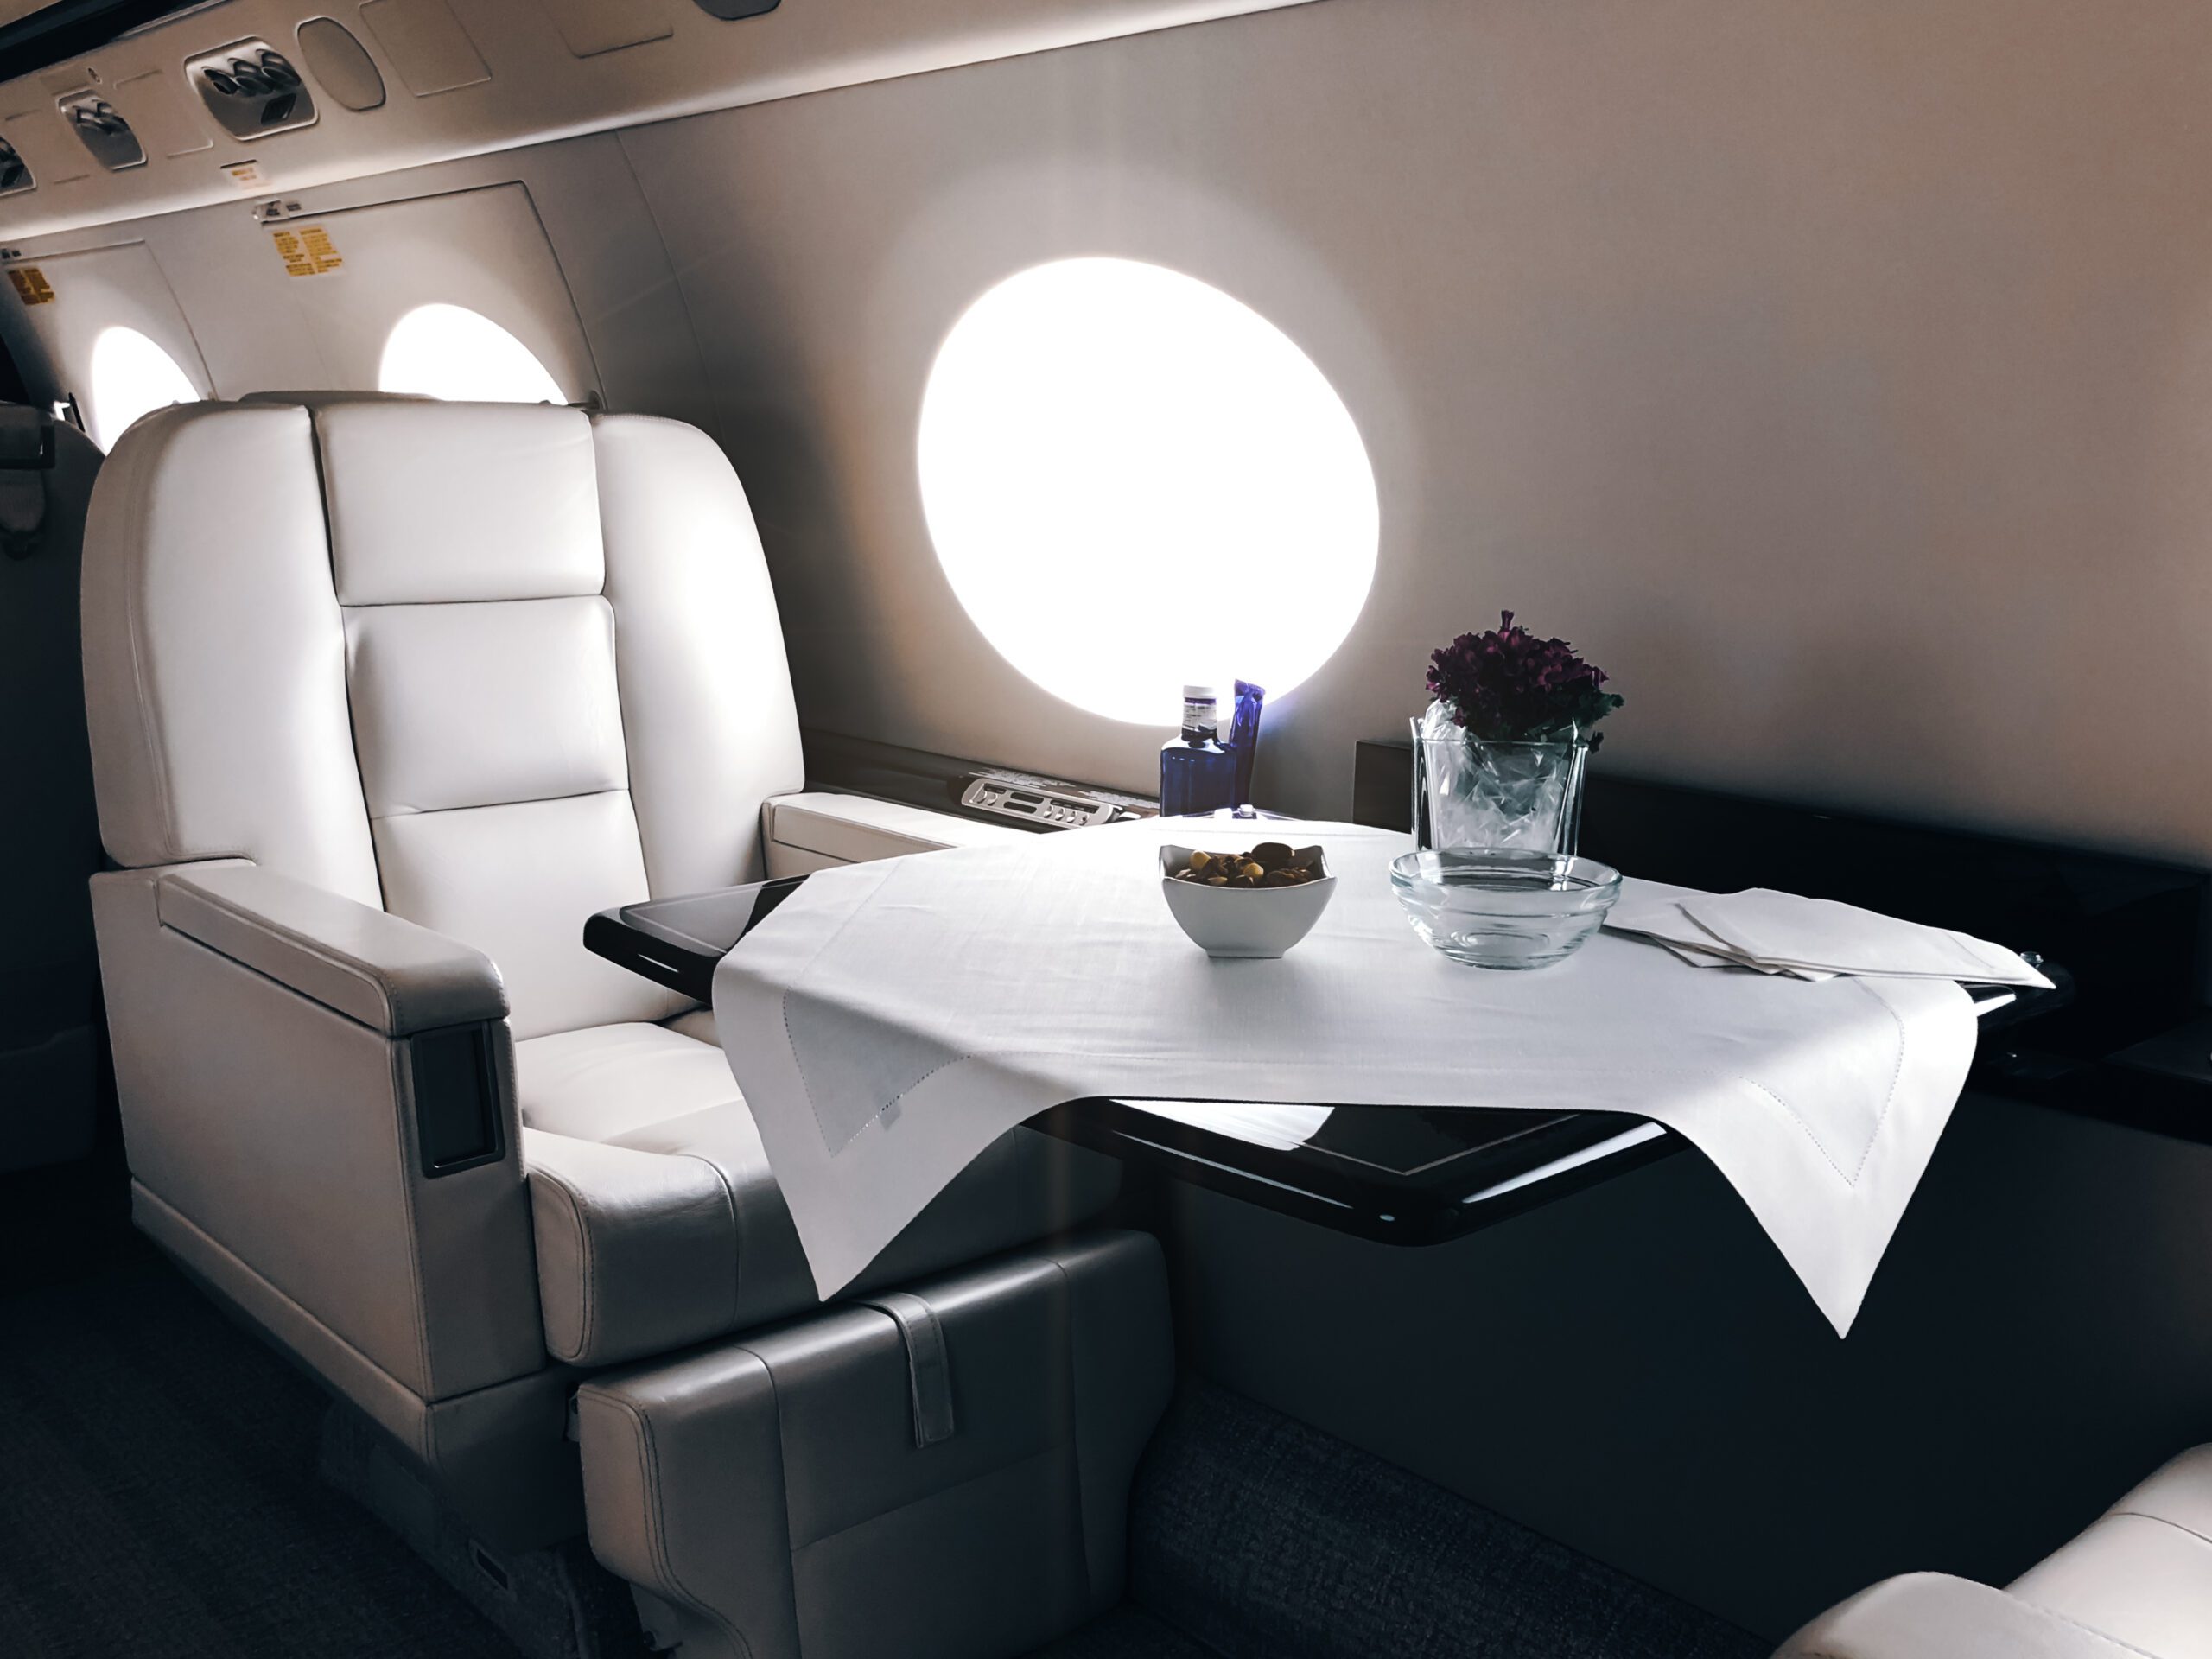 Interior of a private luxury jet